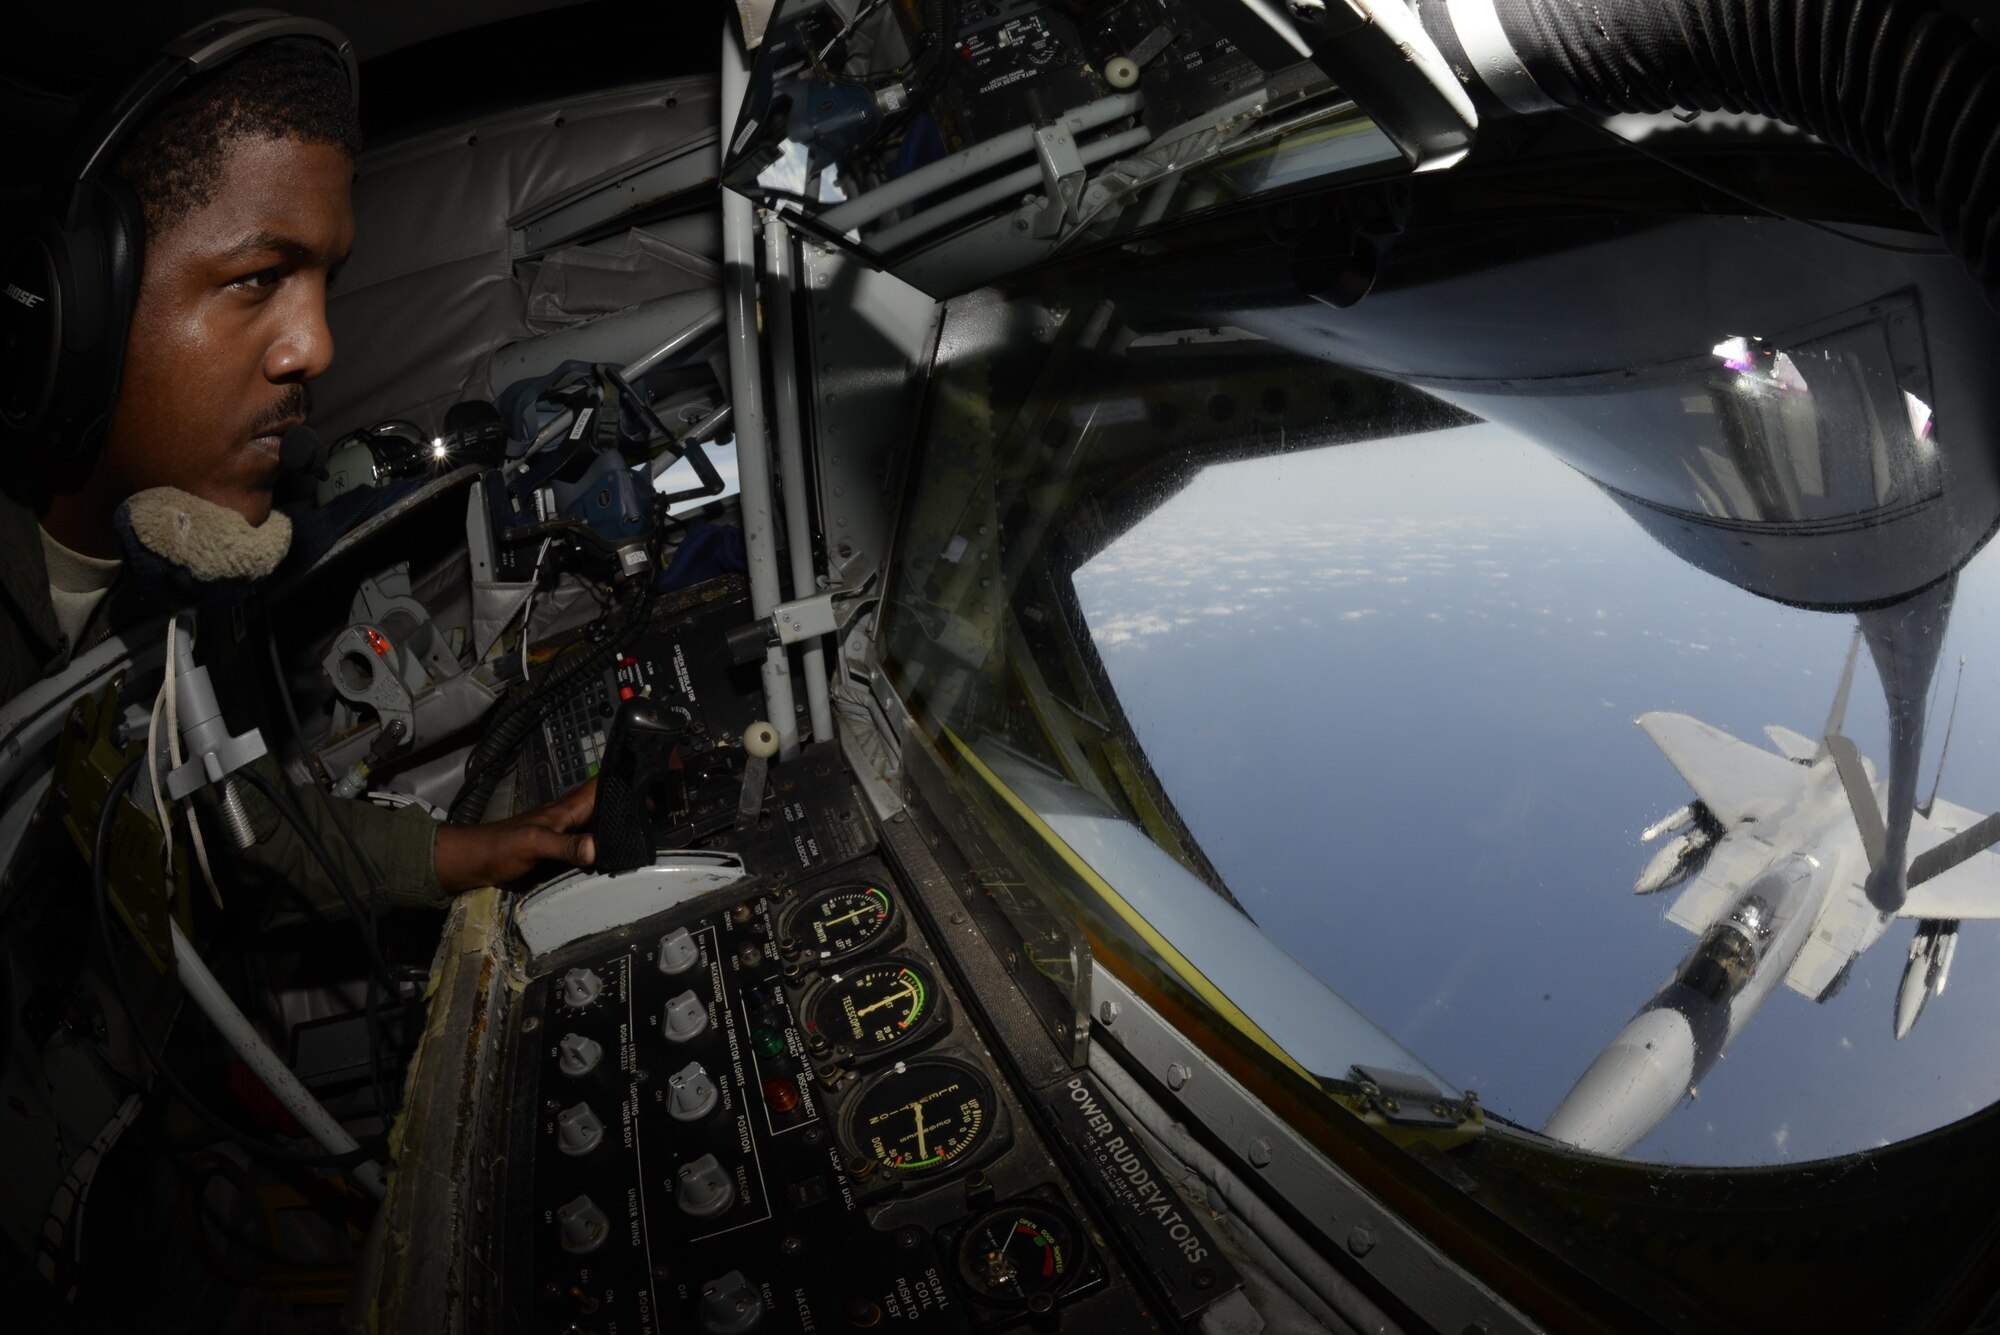 U.S. Air Force Airman 1st Class Cory Drummond, 909th Aircraft Refueling Squadron boom operator, refuels an F-15C Eagle during a refueling mission April 20, 2016, near Kadena Air Base, Japan. The 909th ARS invited Kadena’s honorary commanders to observe the refuelling in order to showcase the 18th Wing’s mission and capabilities.. (U.S. Air Force photo by Senior Airman Stephen G. Eigel)